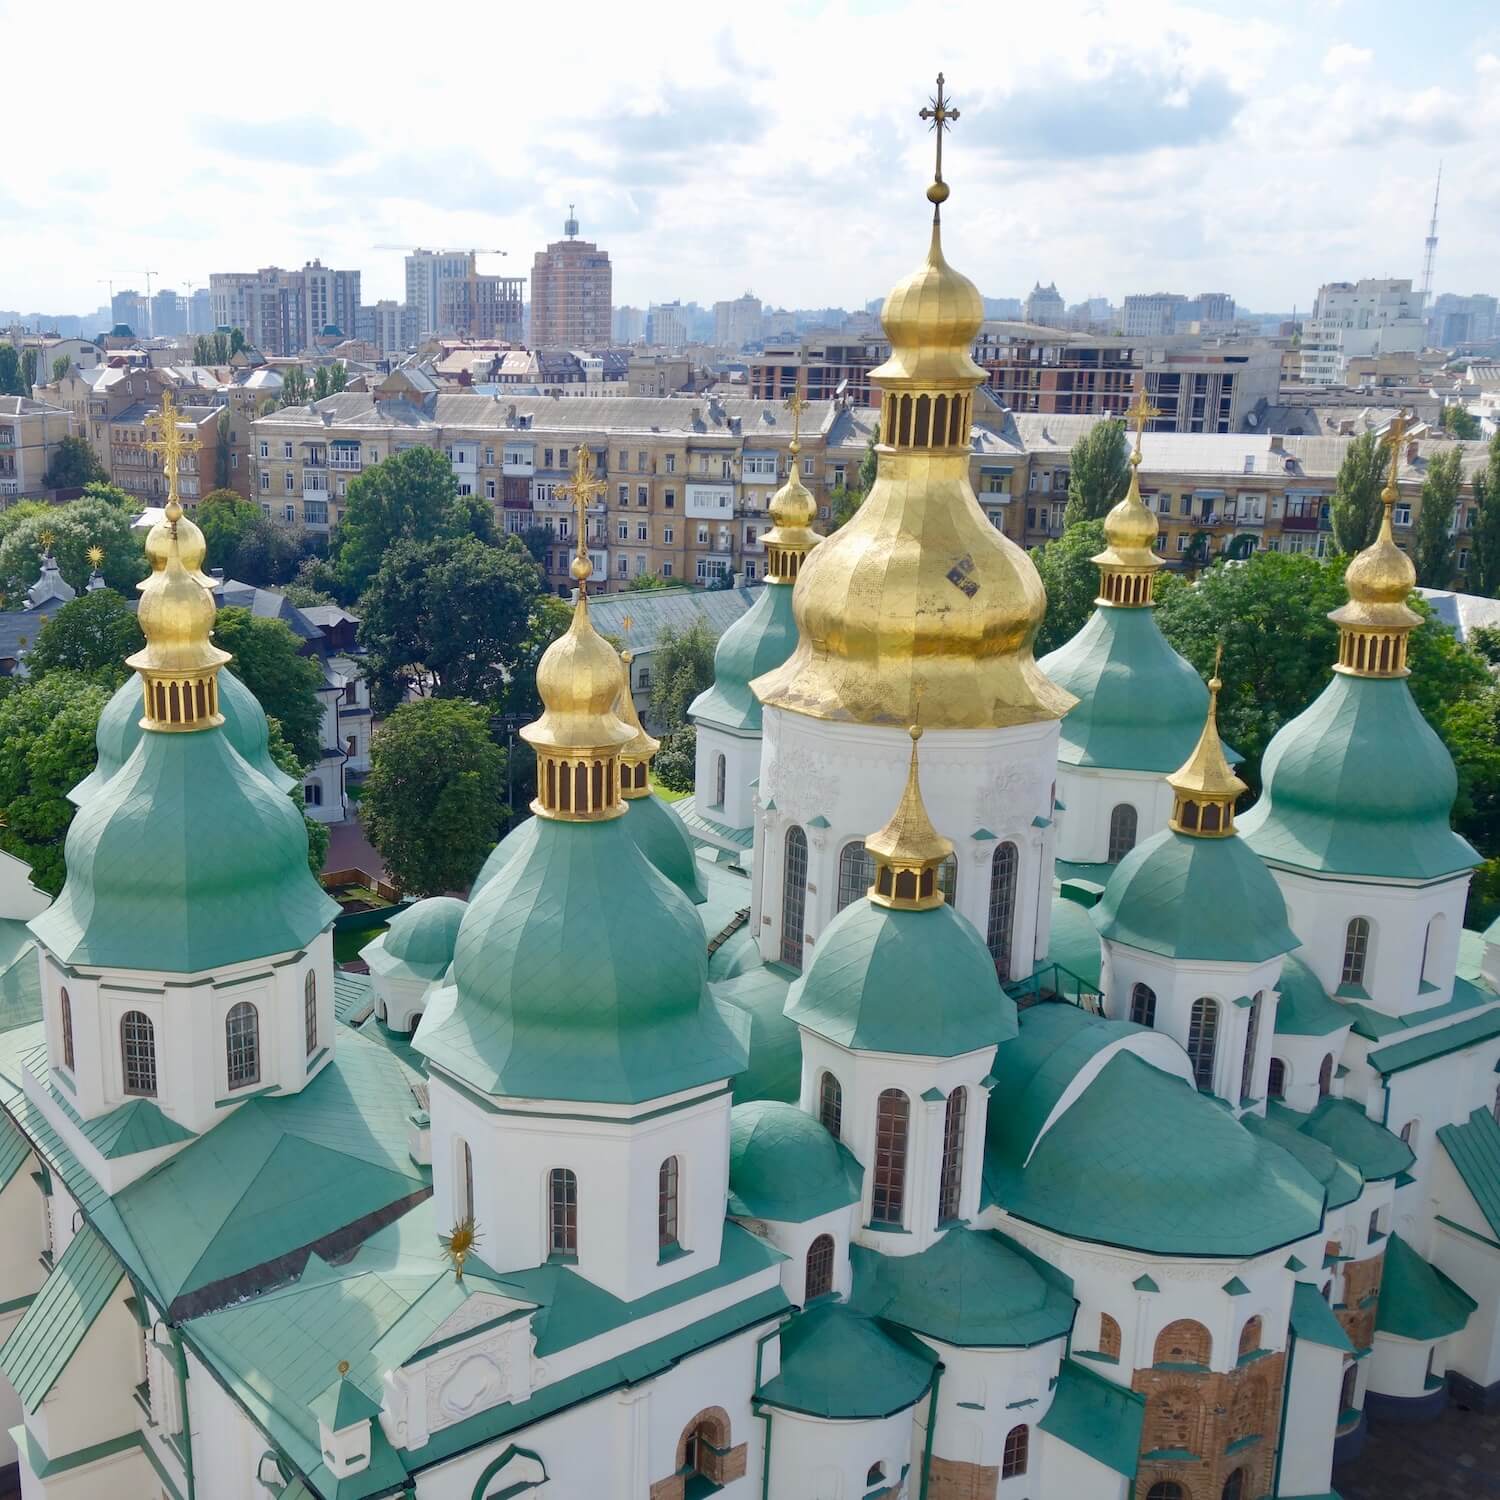 View of St. Sofia's Cathedral from high atop the bell tower.  